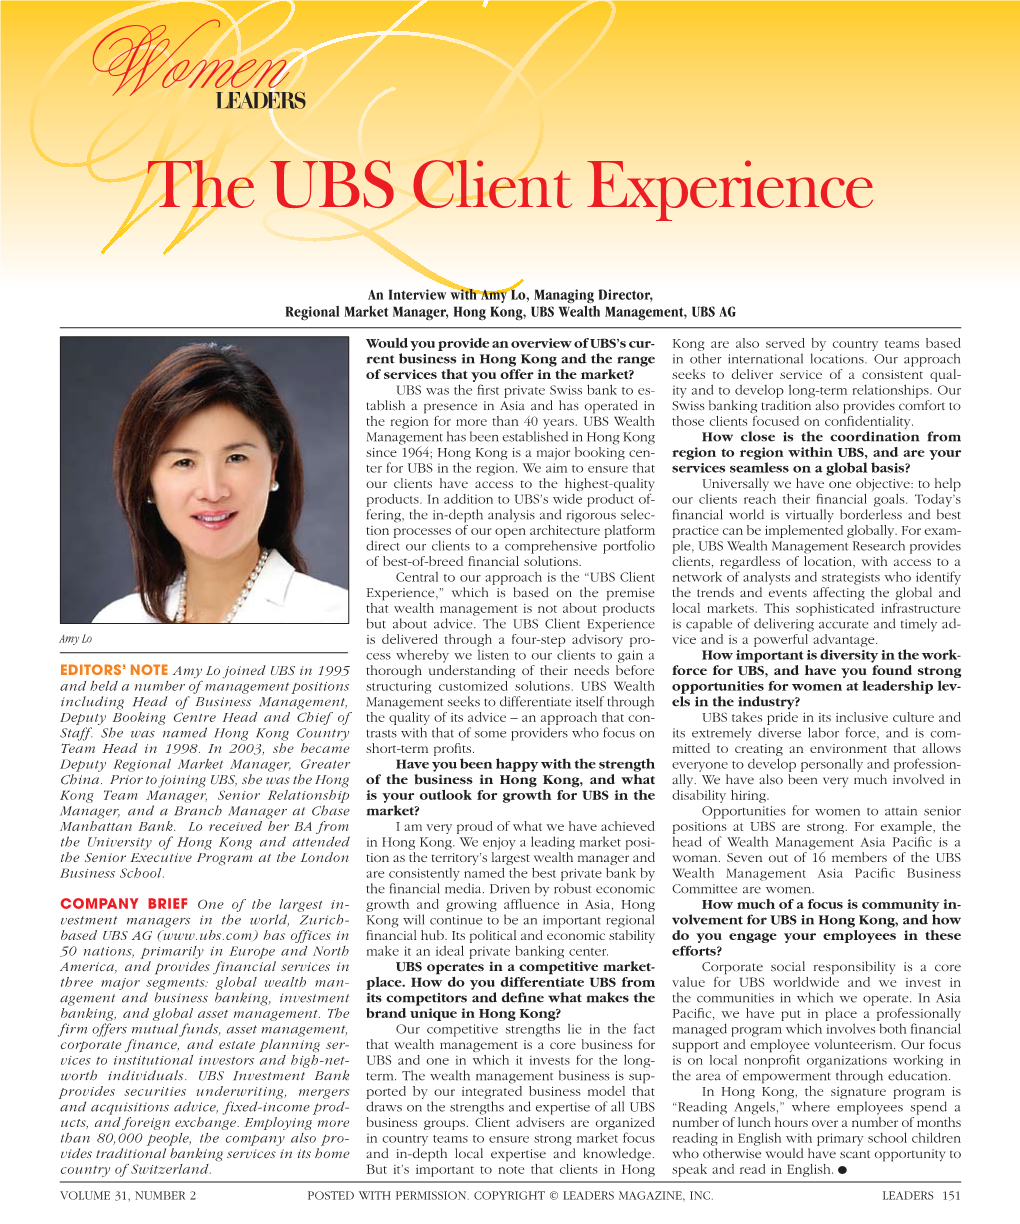 The UBS Client Experience